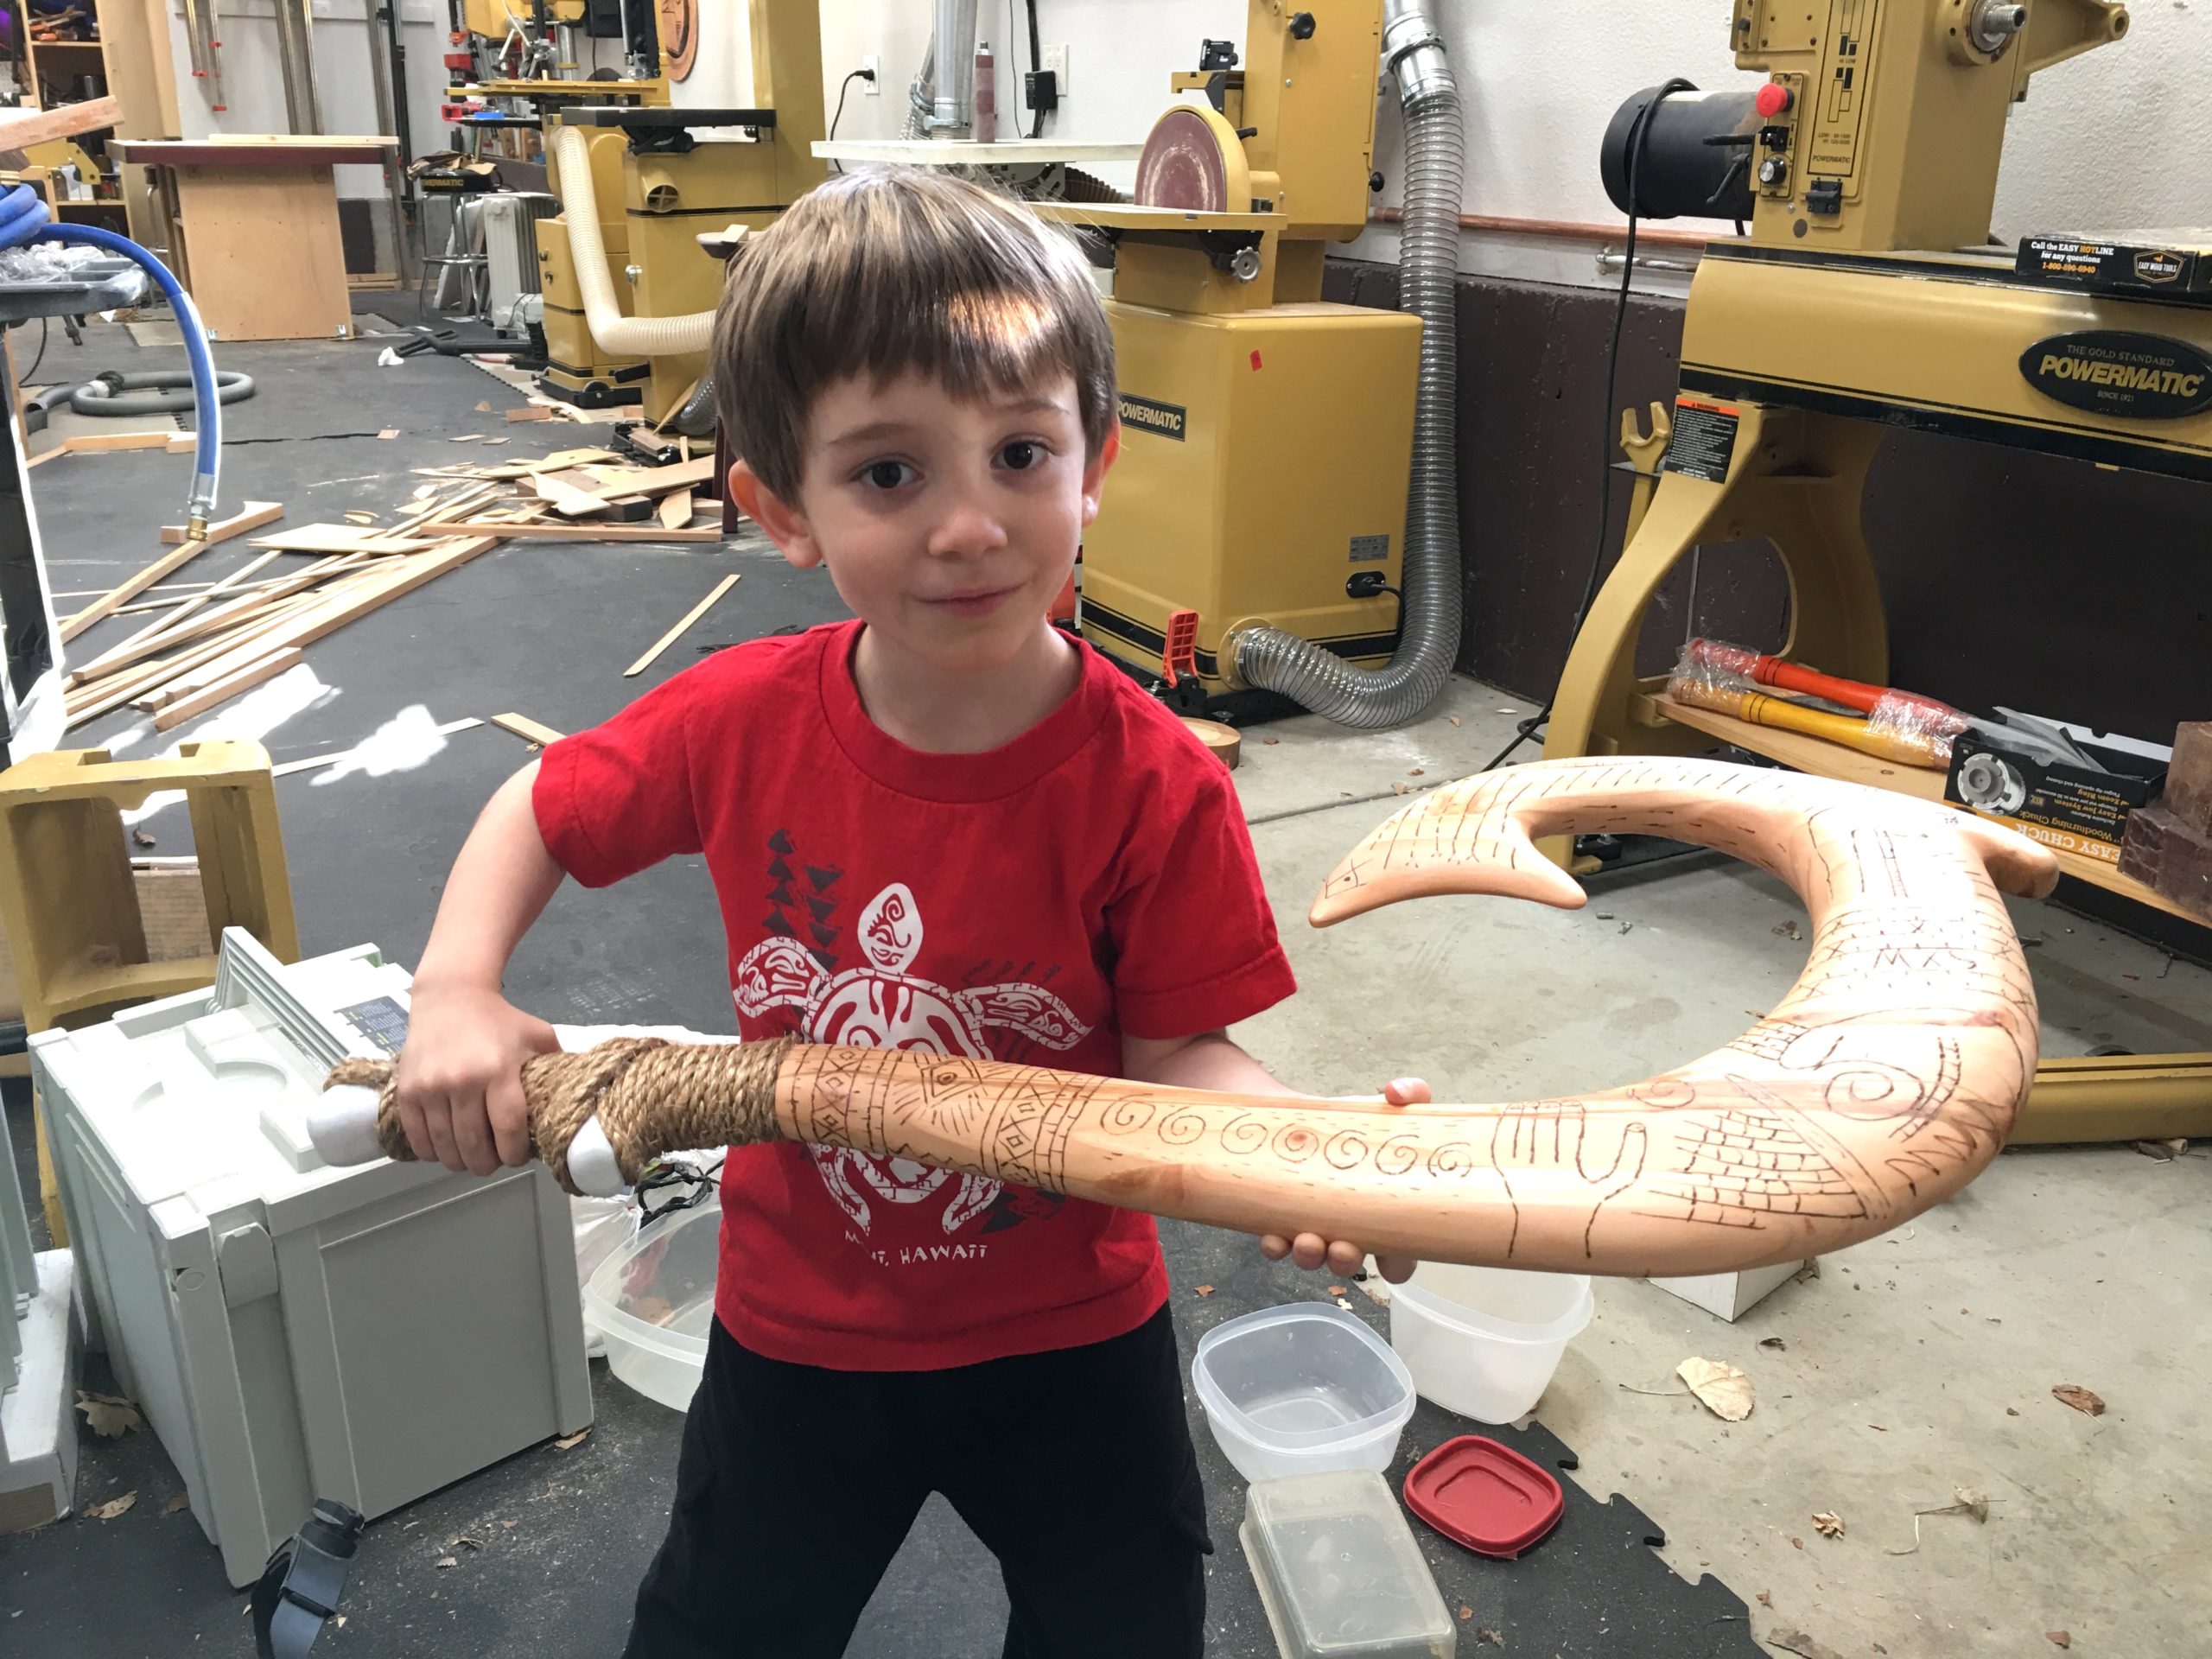 Maui's Hook from a 2x4! - Disney's Moana  Maui's Hook from a 2x4!  Recently, my son has been obsessed with the Disney movie Moana. One of the  primary characters is the